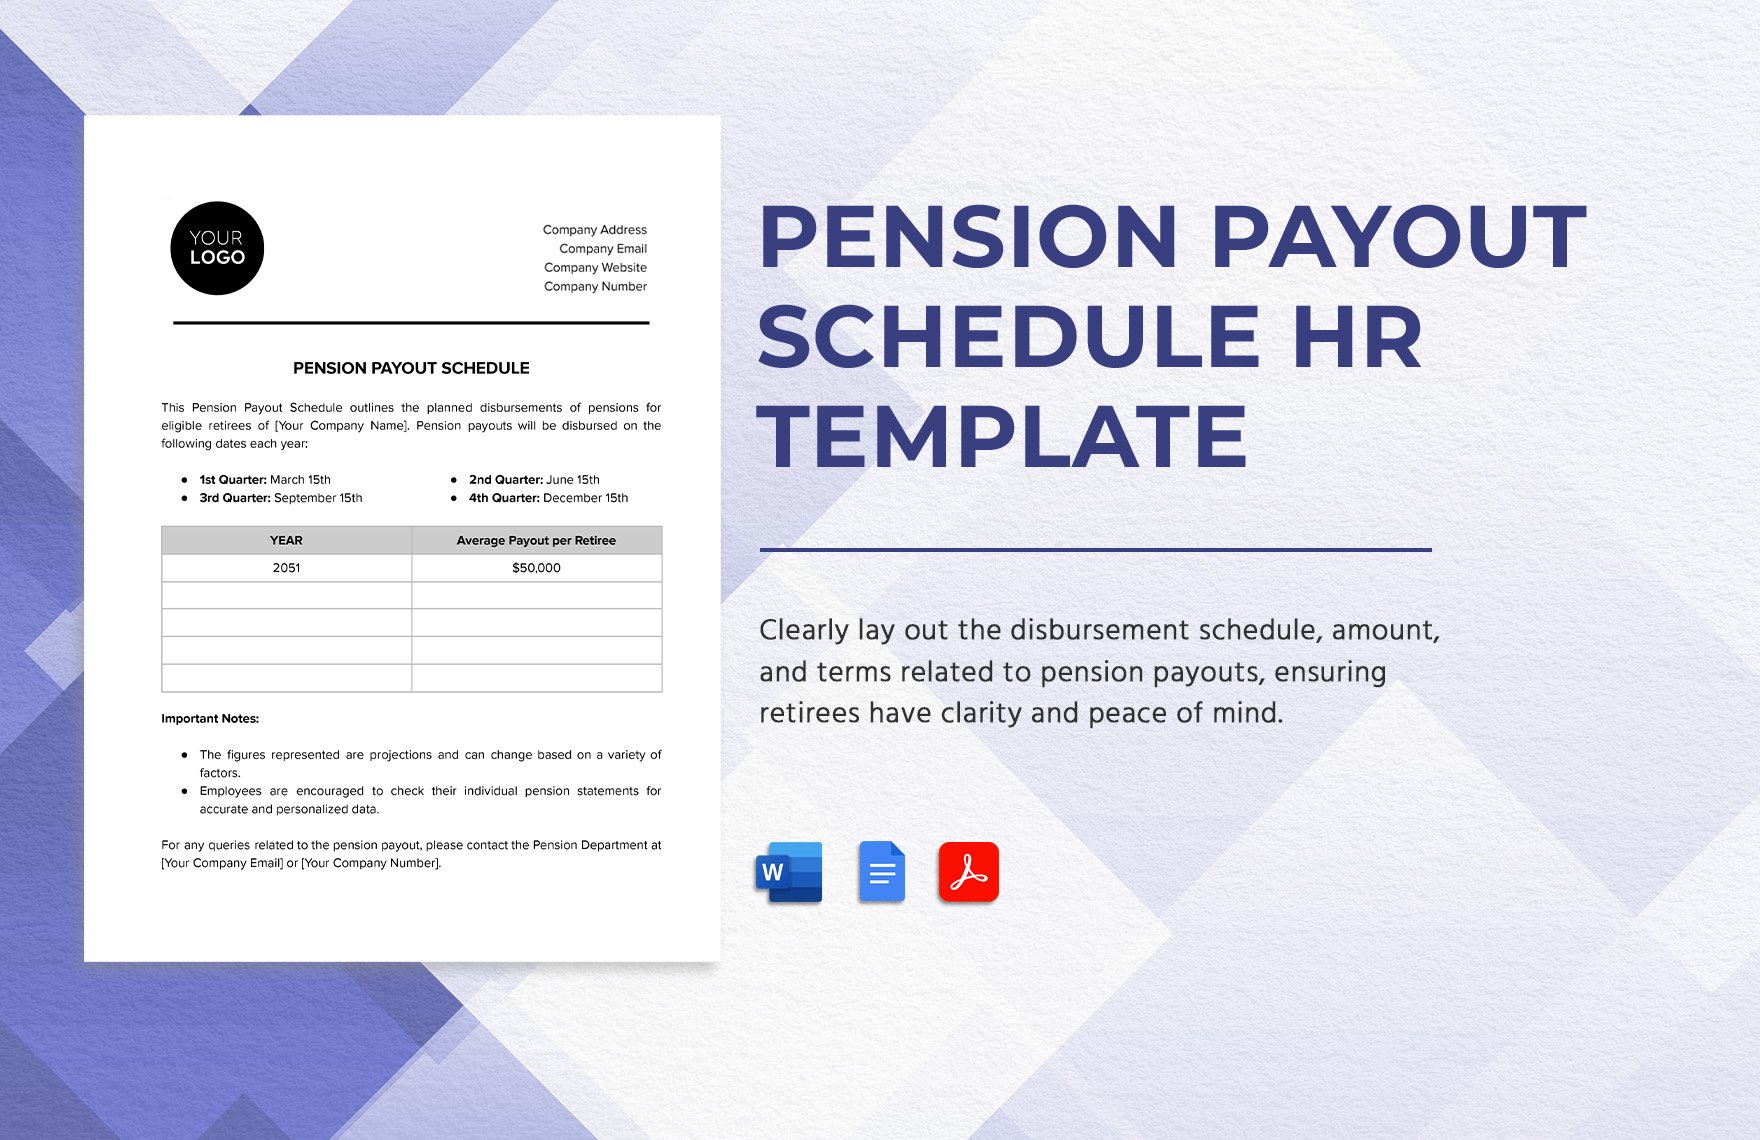 Pension Payout Schedule HR Template in Word, Google Docs, PDF